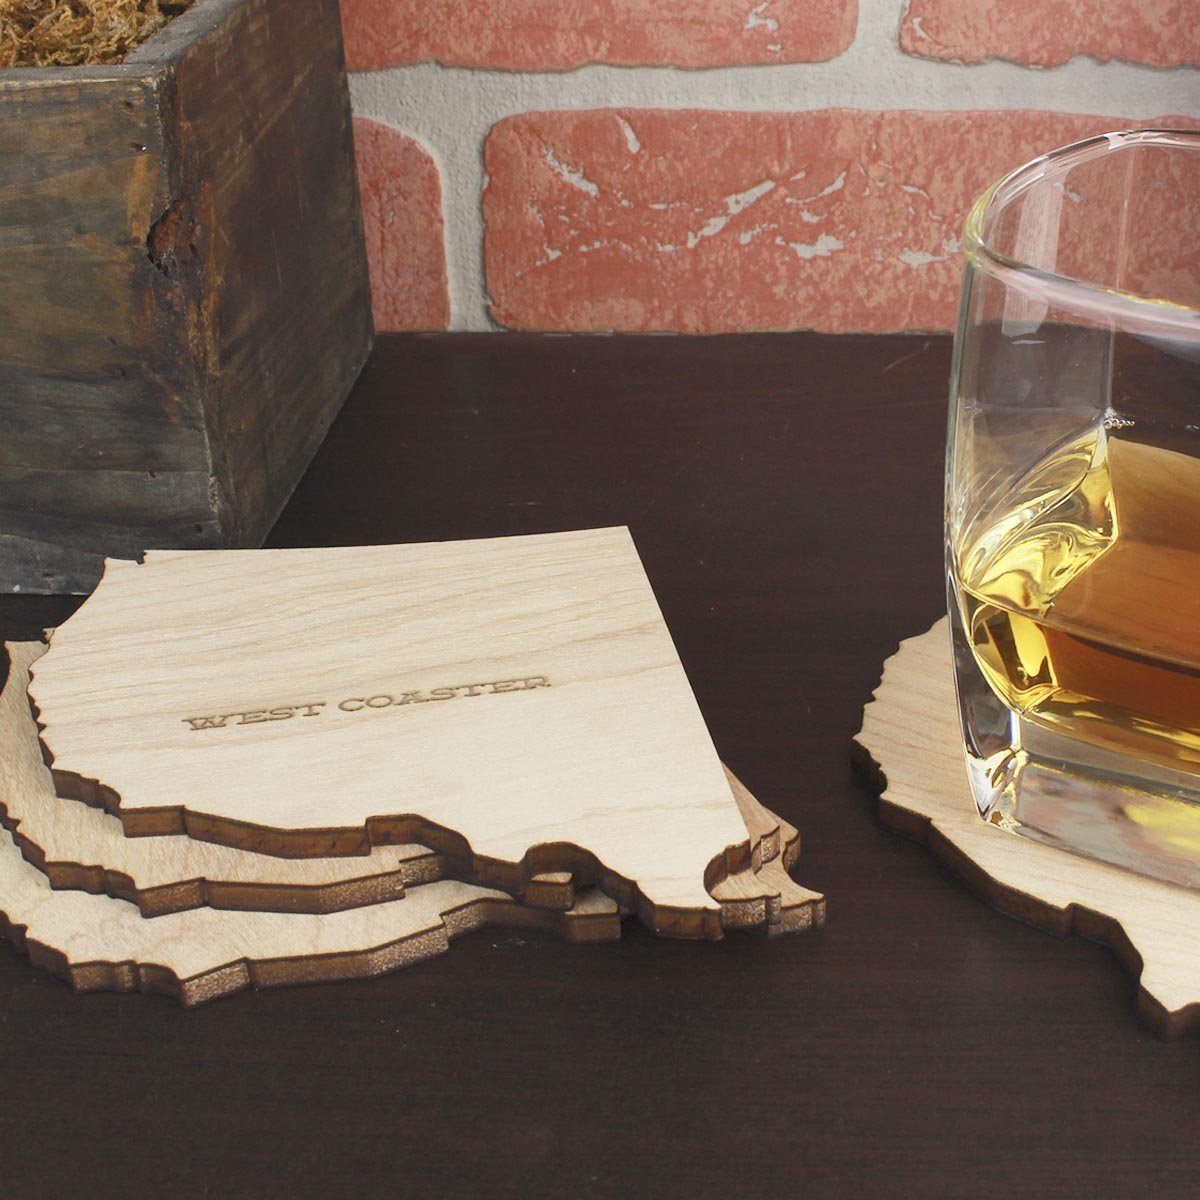 Torched Products Coasters West Coaster Wood Coaster